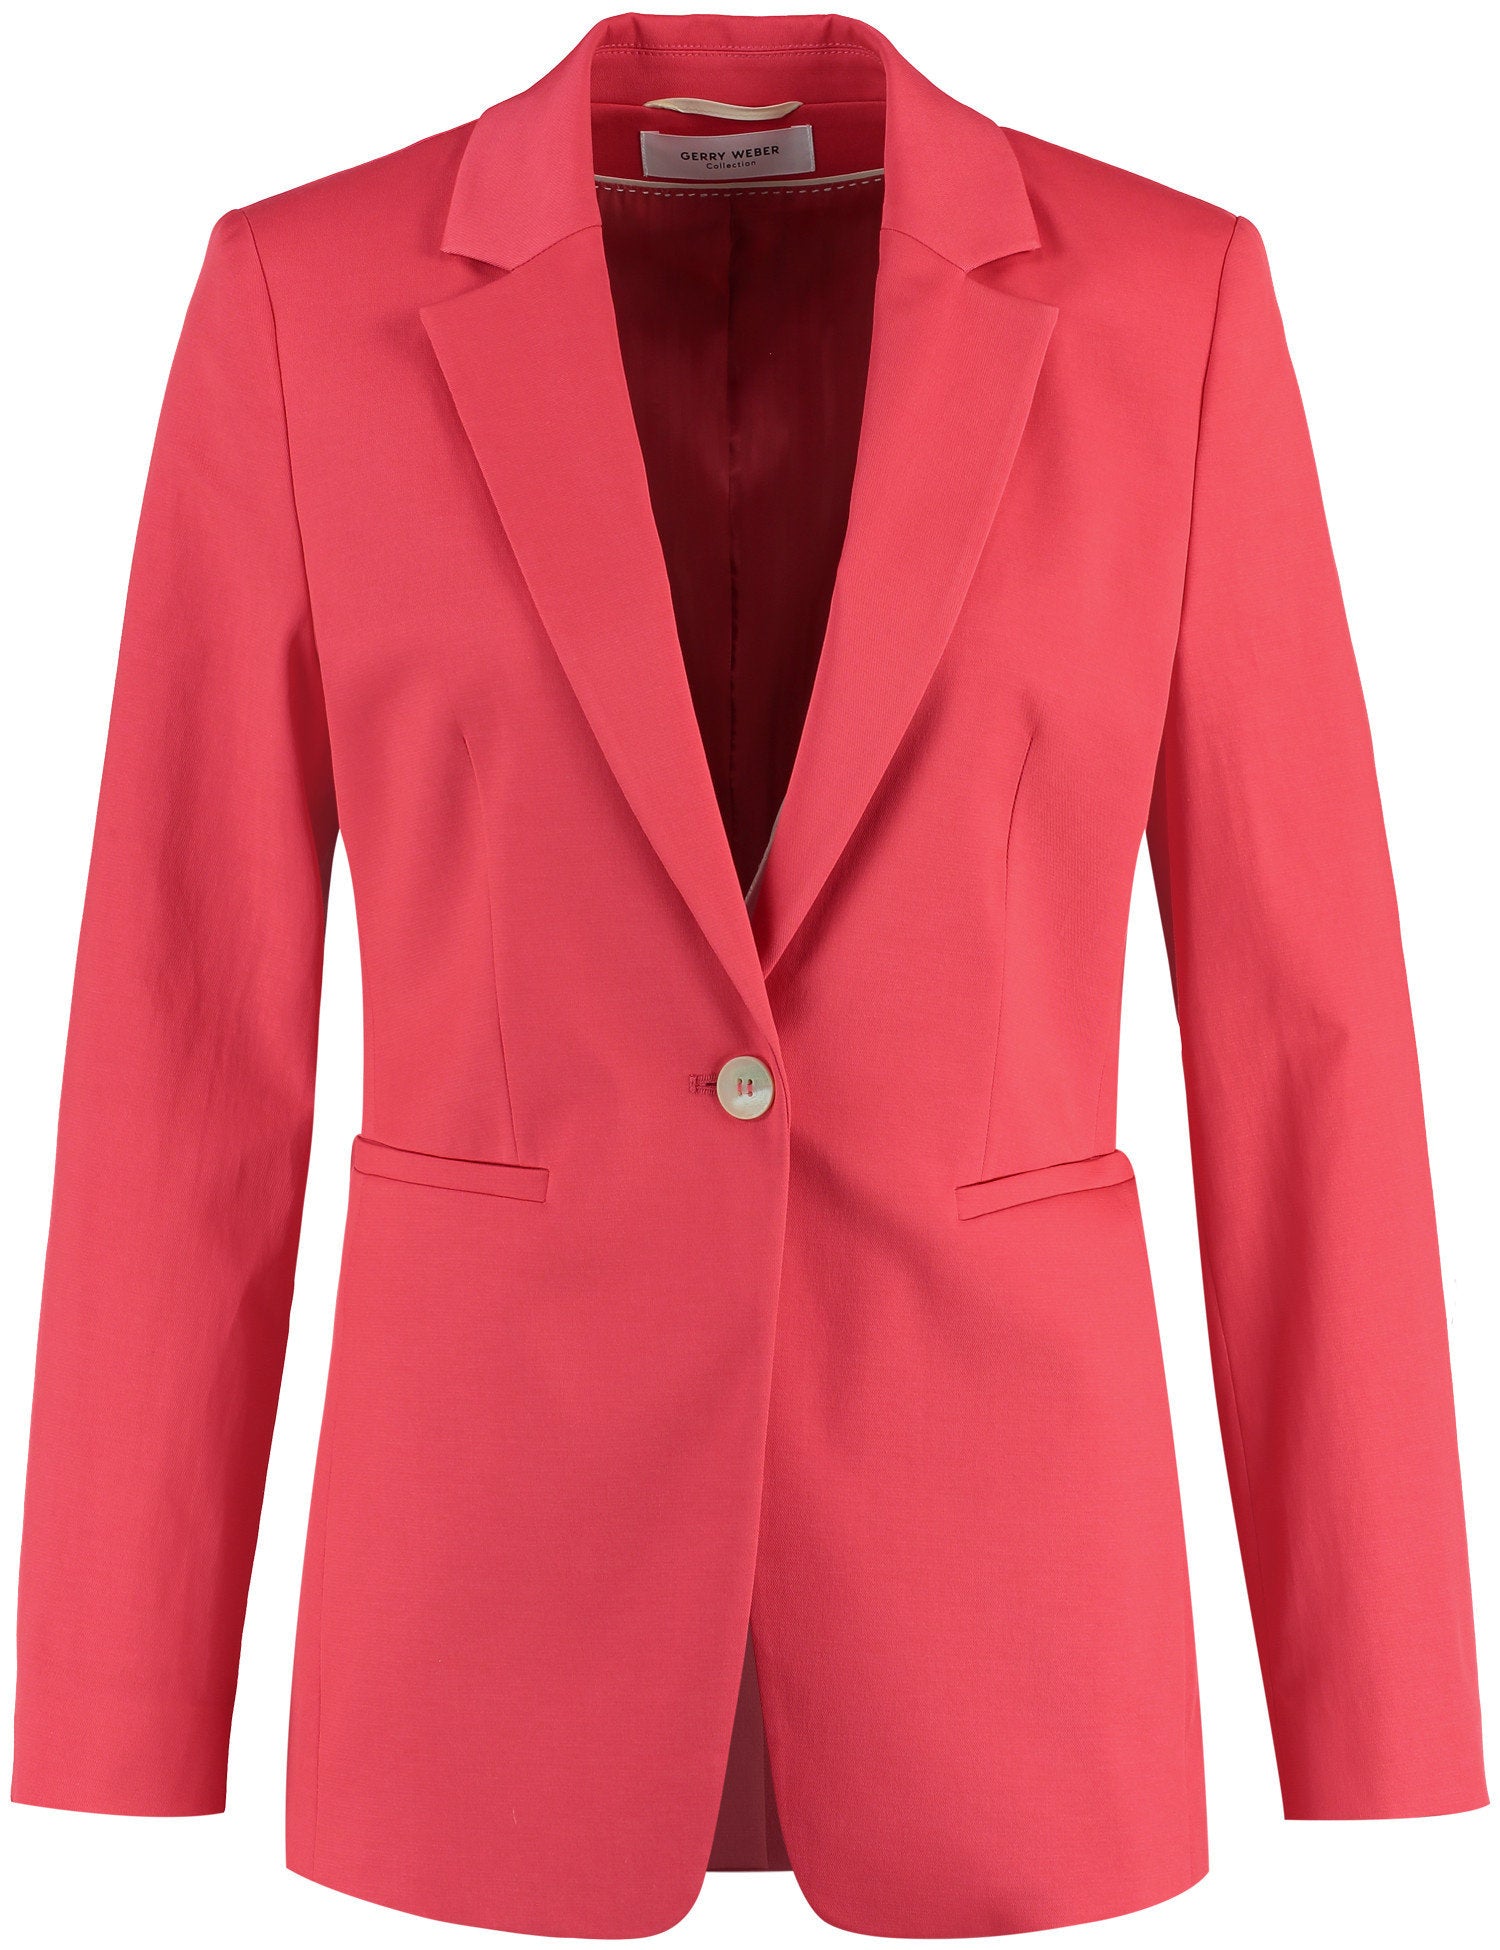 Classic Blazer With Stretch For Comfort_330004-31332_60140_02